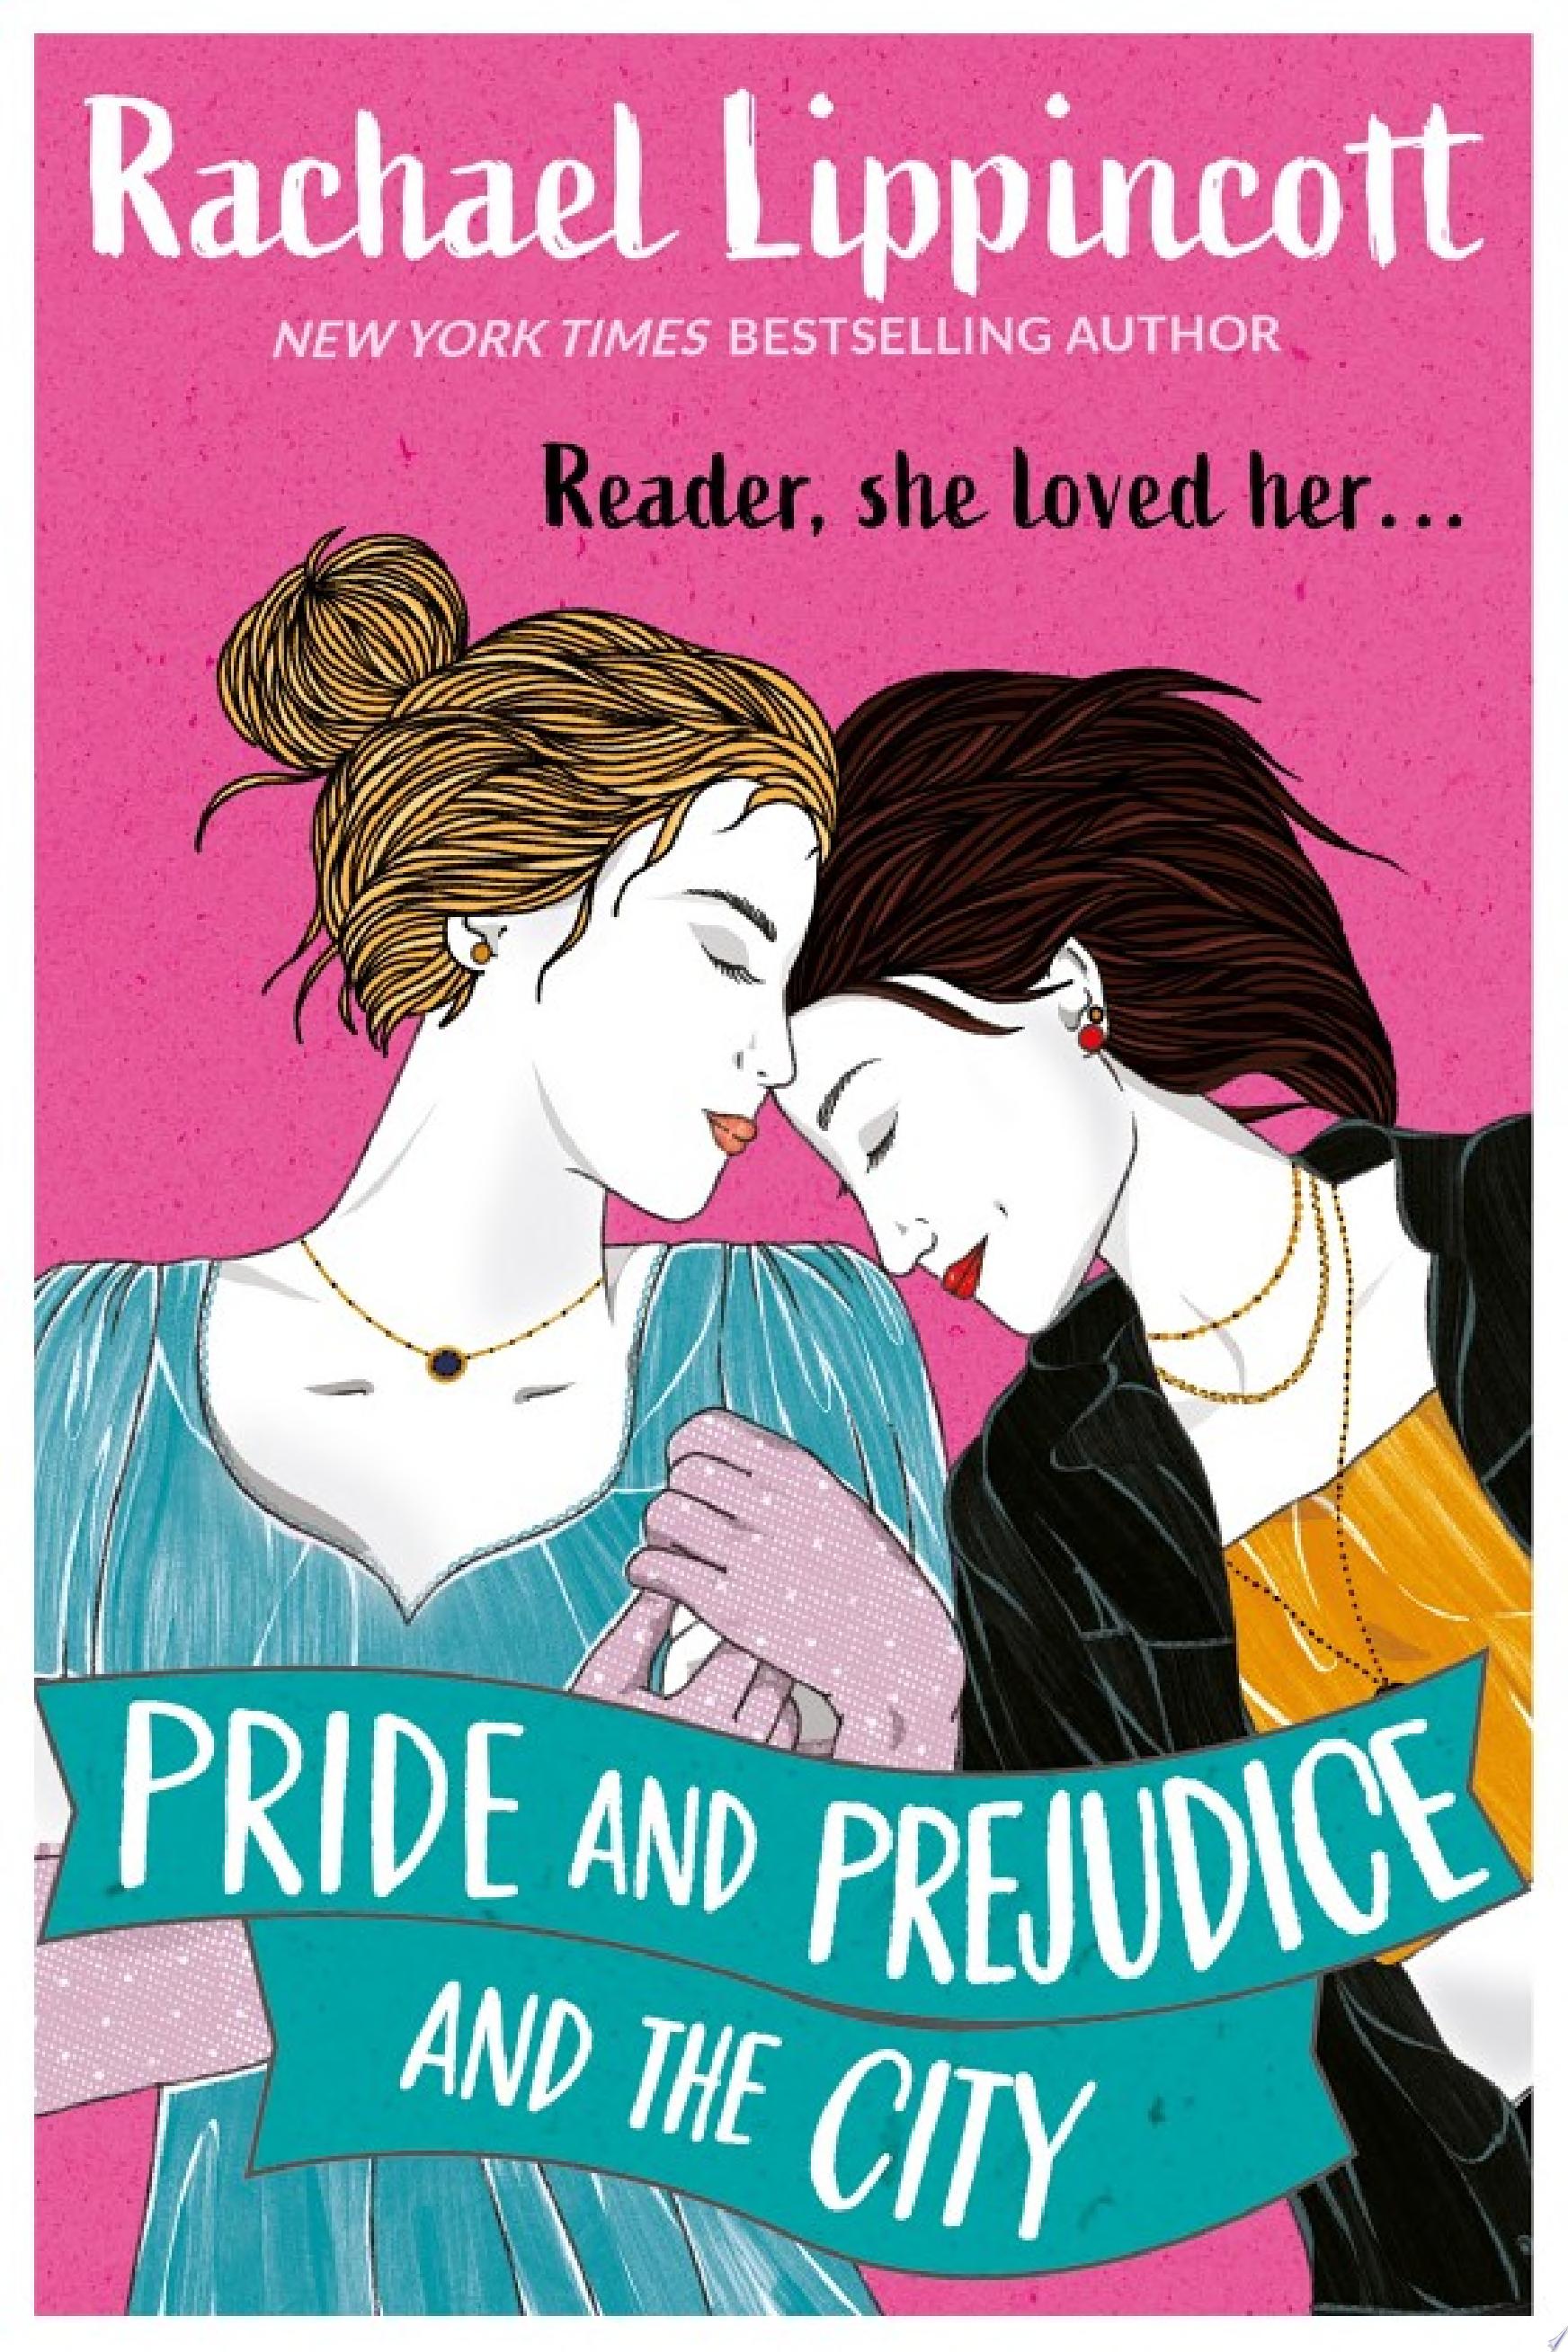 Image for "Pride and Prejudice and the City"